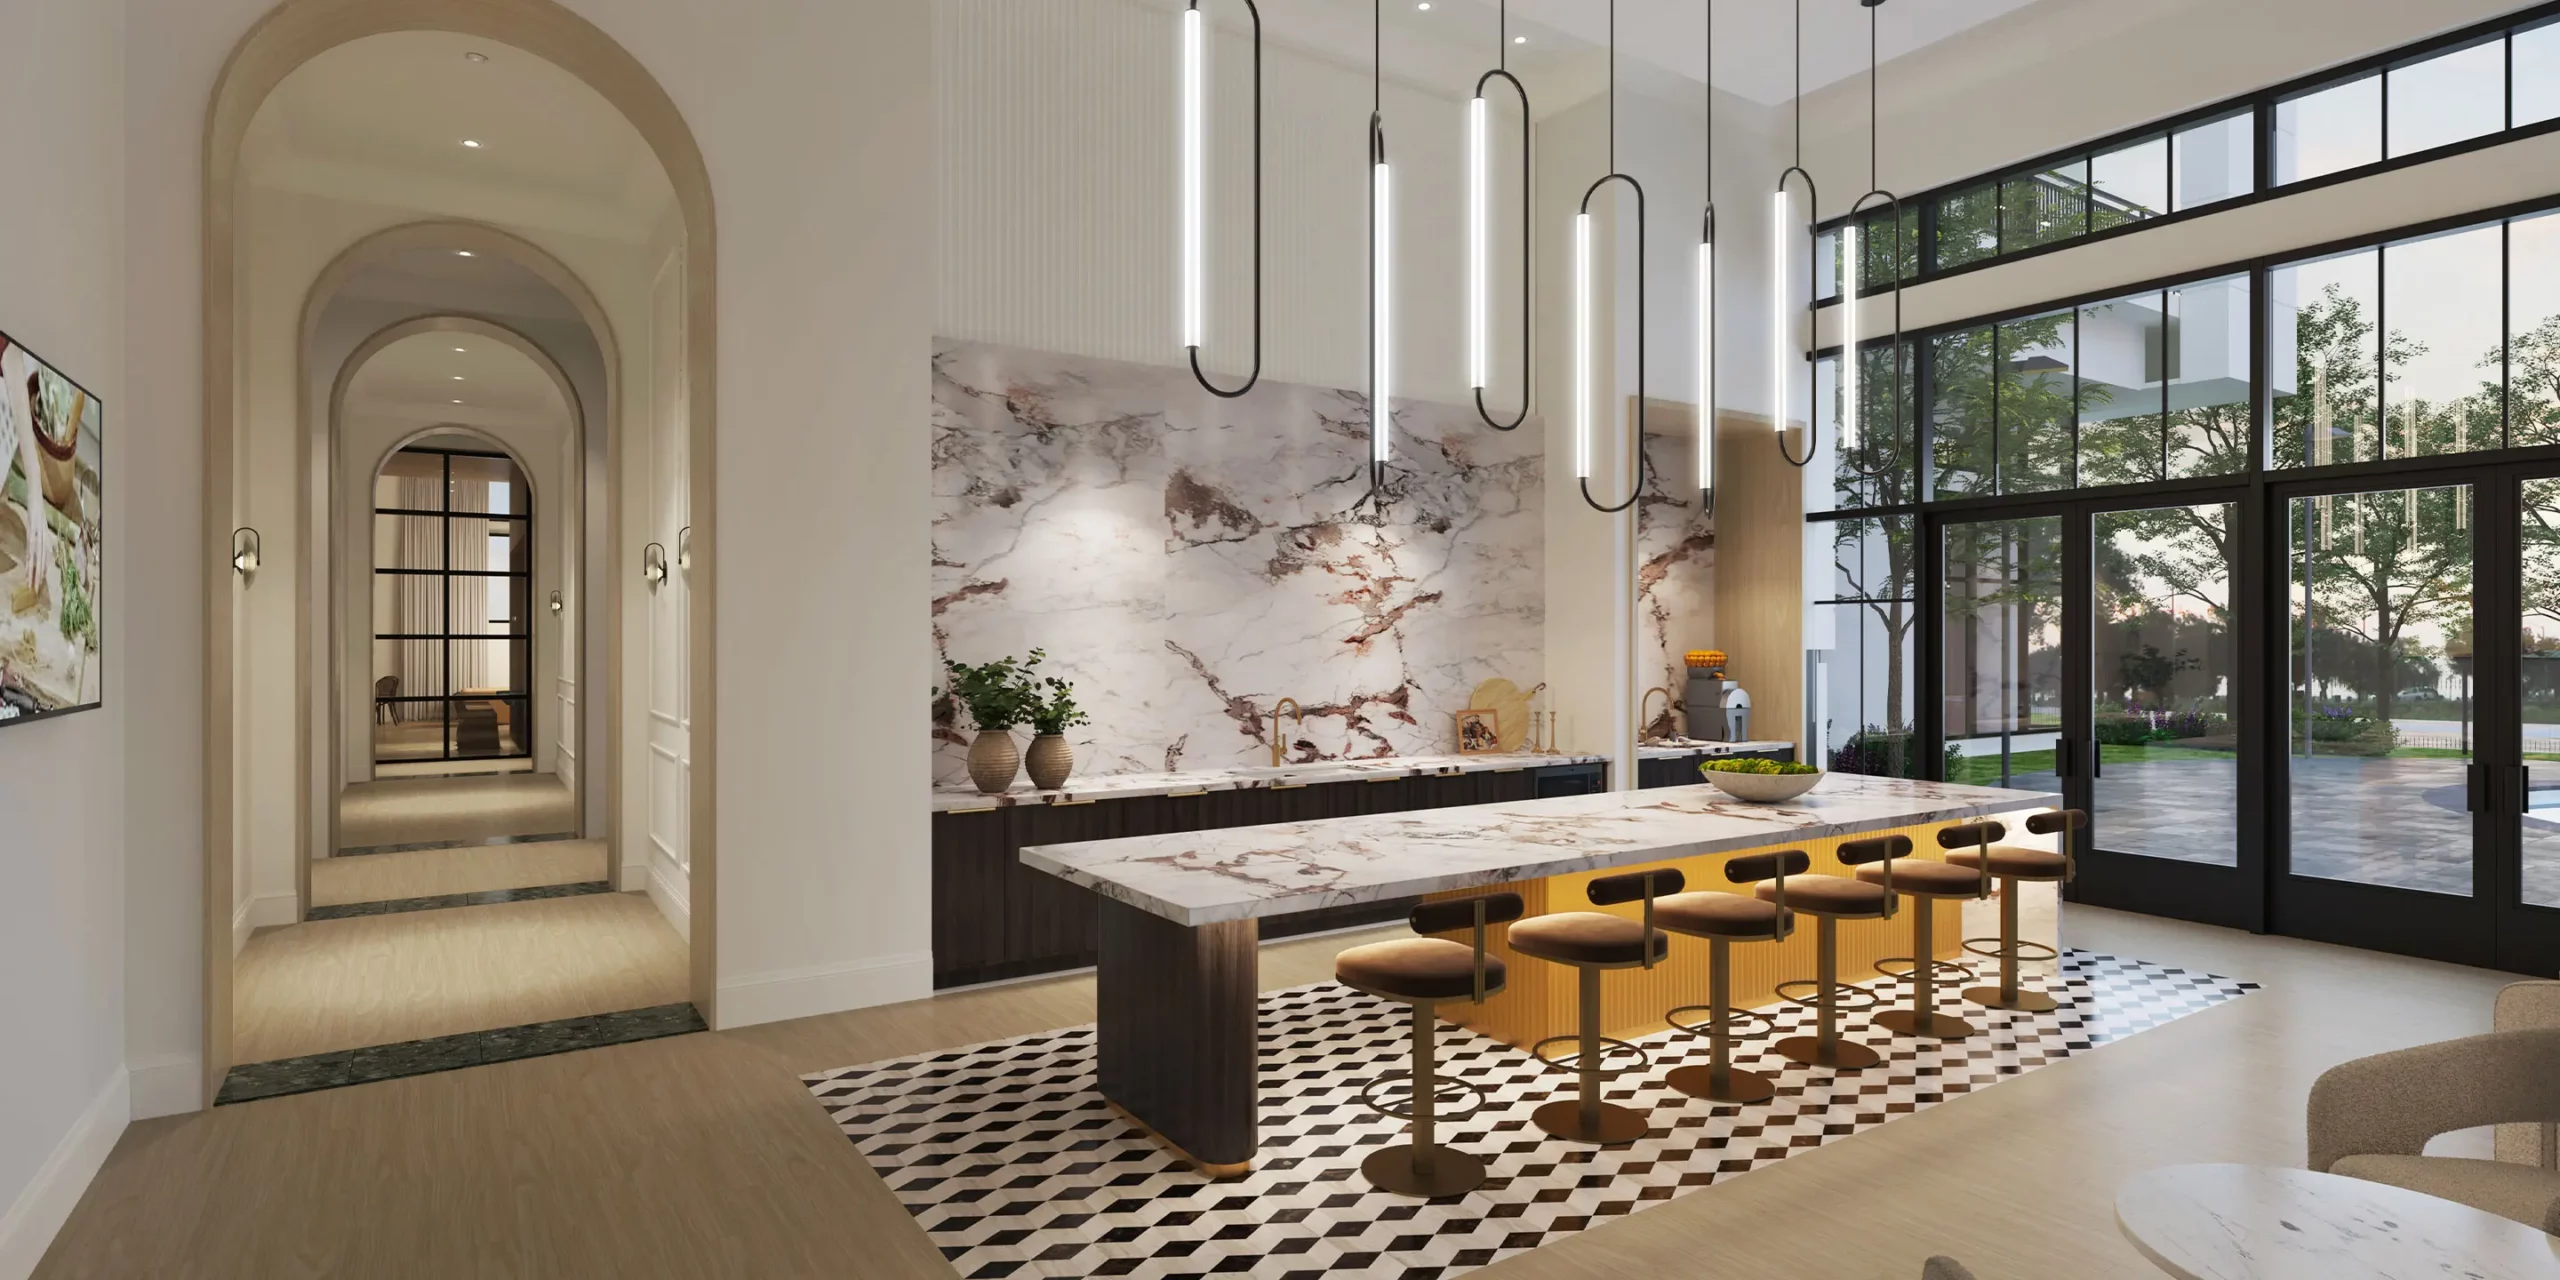 modera-nations-multifamily-residential-coopercarry-rendering-interior-amenity-lobby